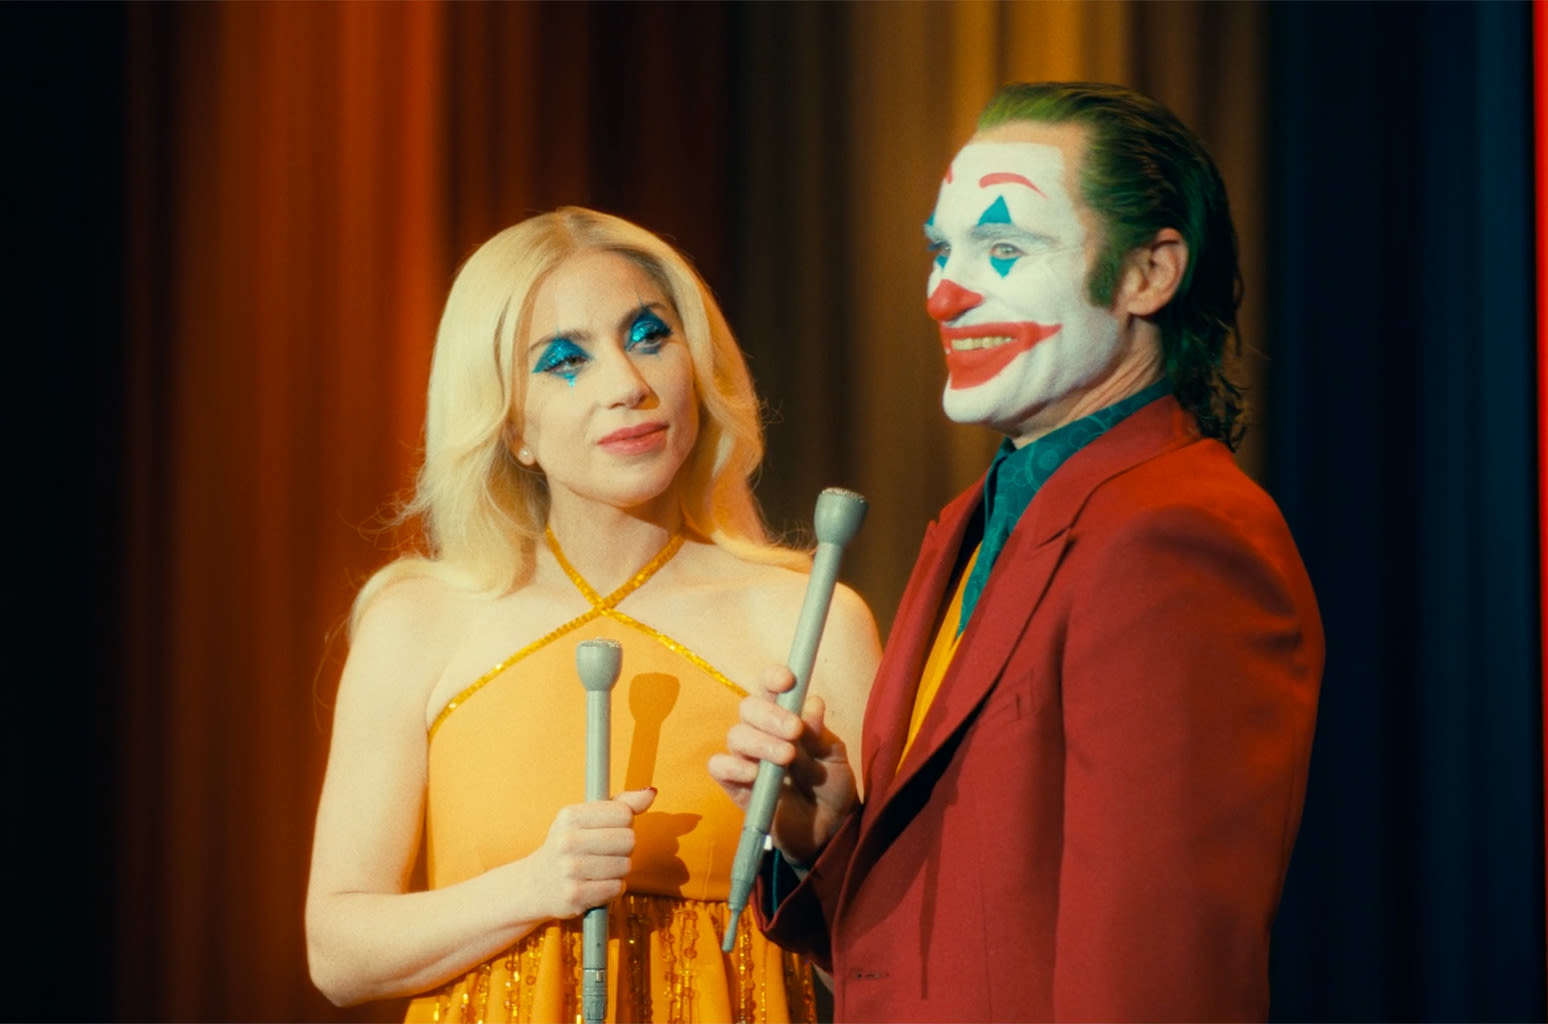 Lady Gaga & Joaquin Phoenix ‘Give the People What They Want’ in Darkly Chaotic ‘Joker’ Trailer: Watch